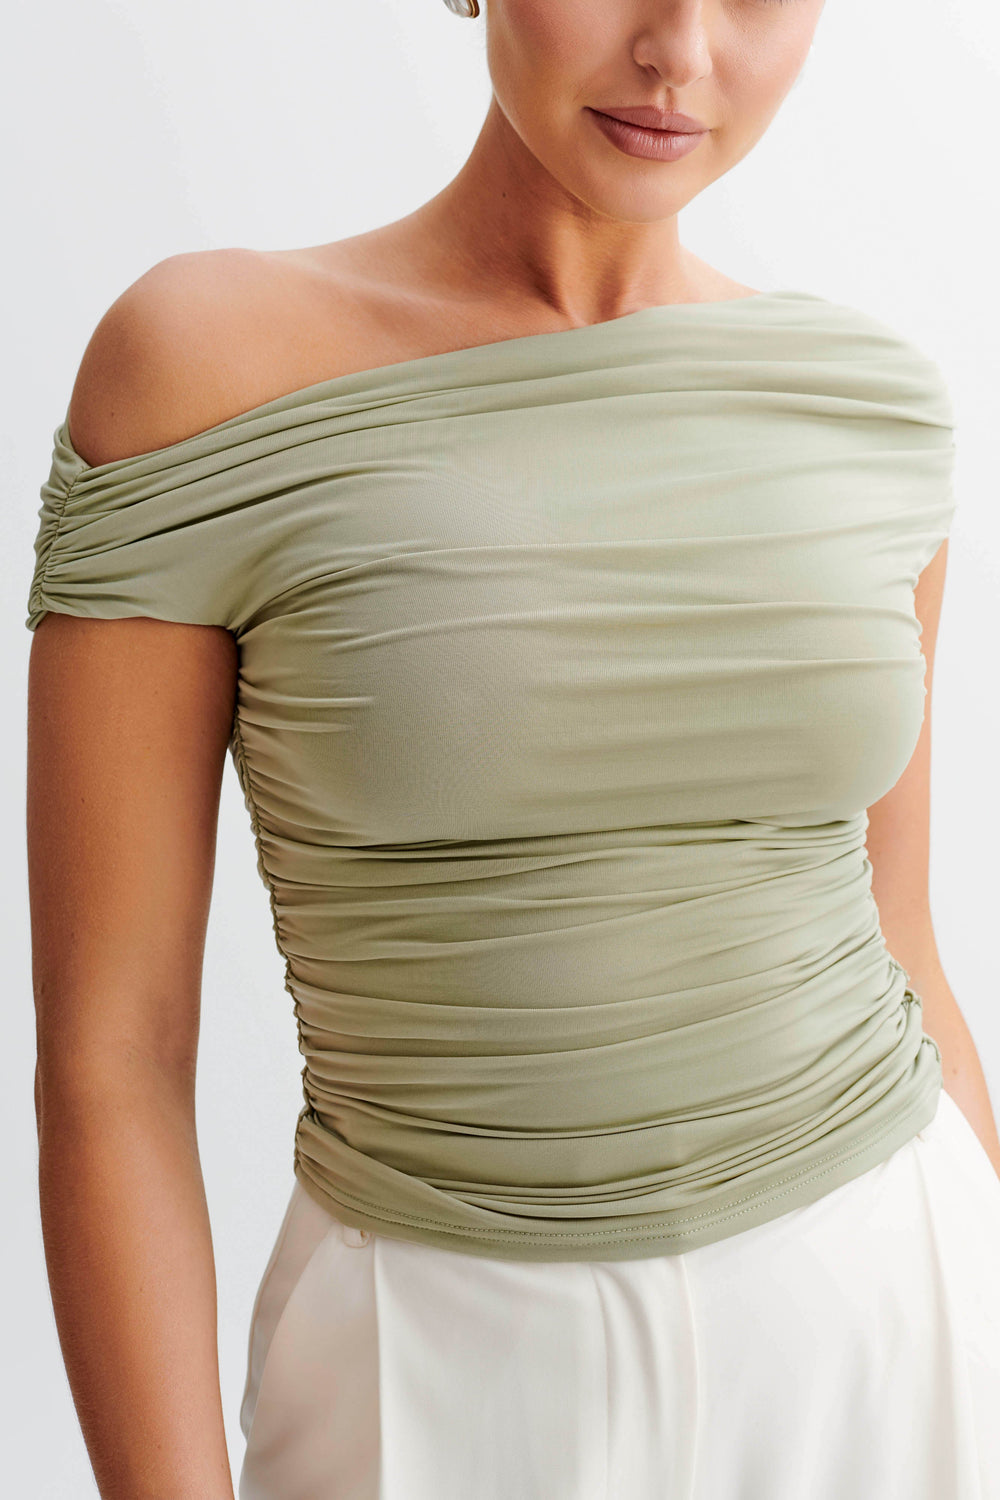 Alayna Slinky Ruched Top - Sage Green